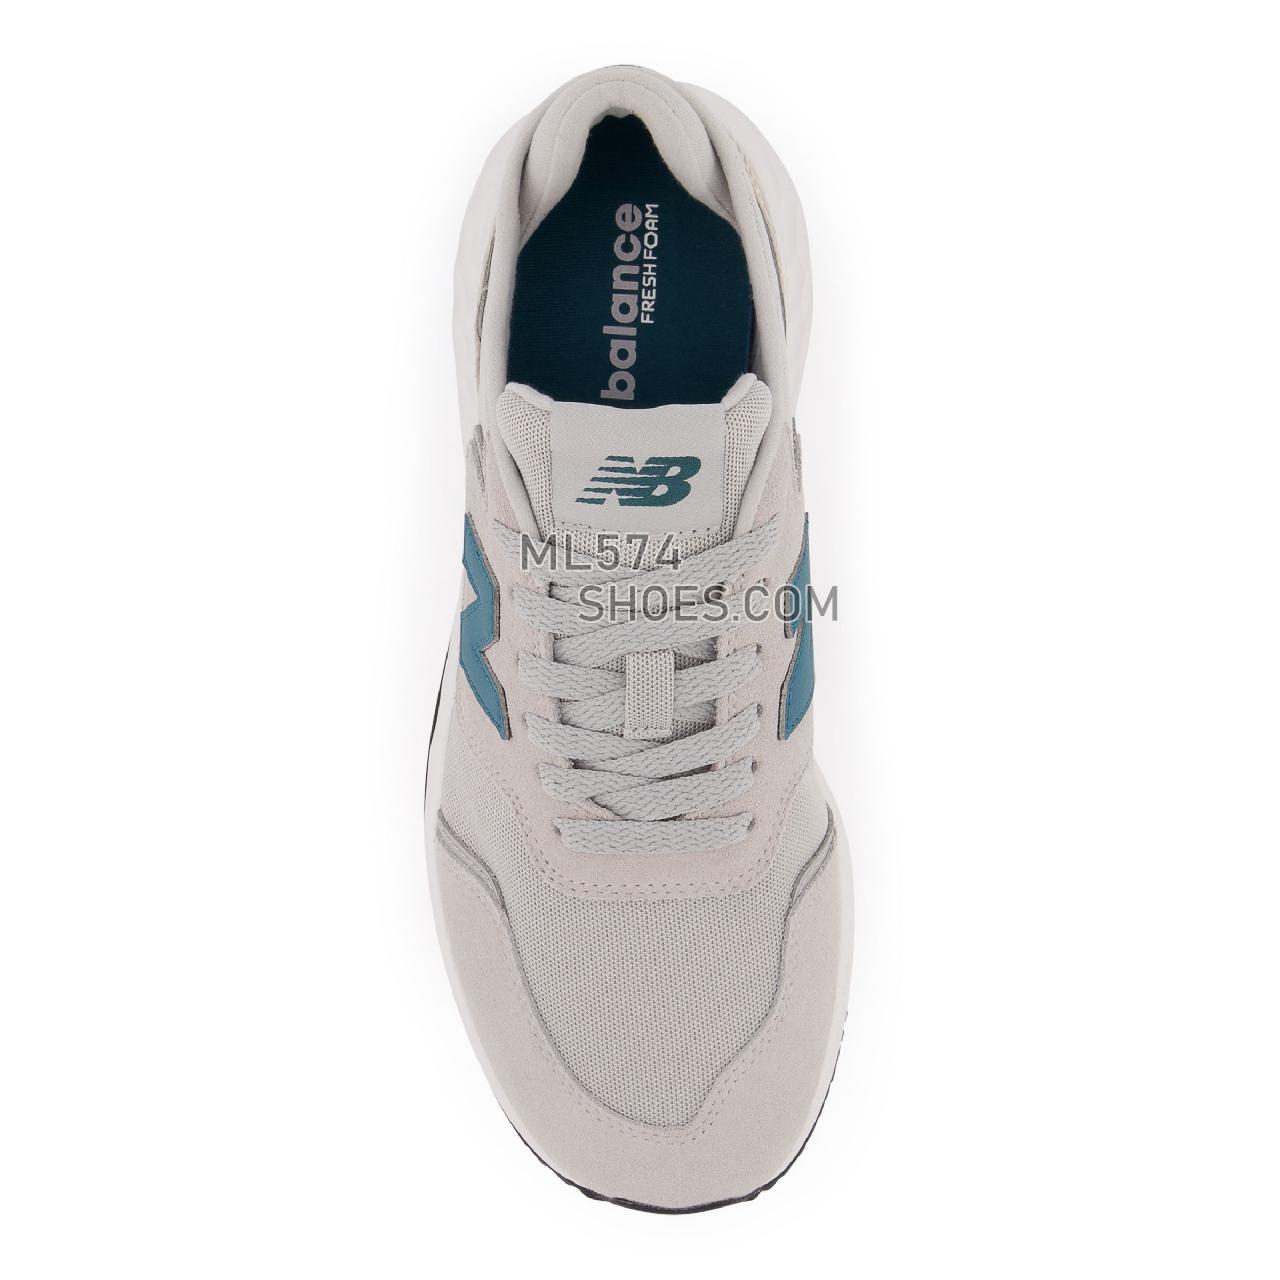 New Balance Fresh Foam X70 - Women's Sport Style Sneakers - Rain Cloud with Mountain Teal and White - WSX70GH1